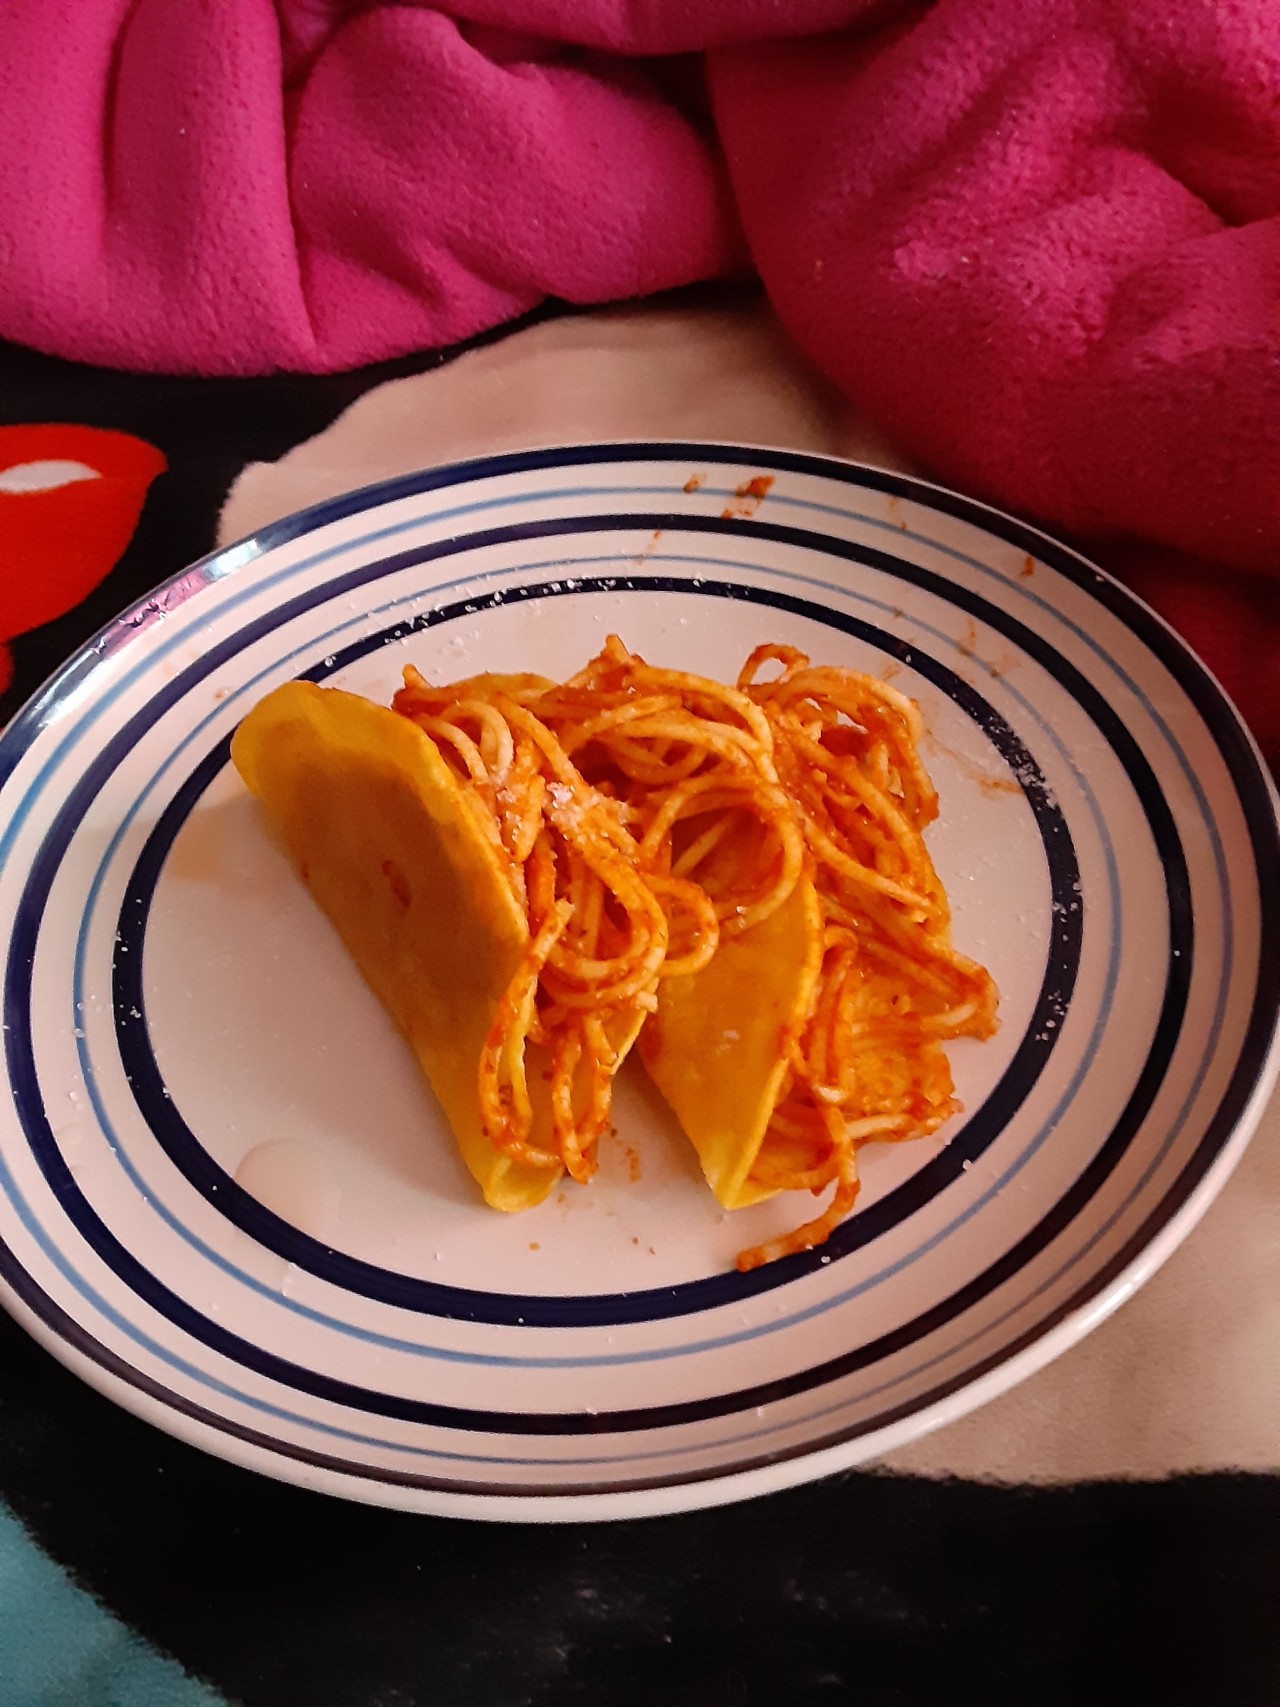 True Colors Are Beautiful Presenting Spaghetti Tacos It Was A Little